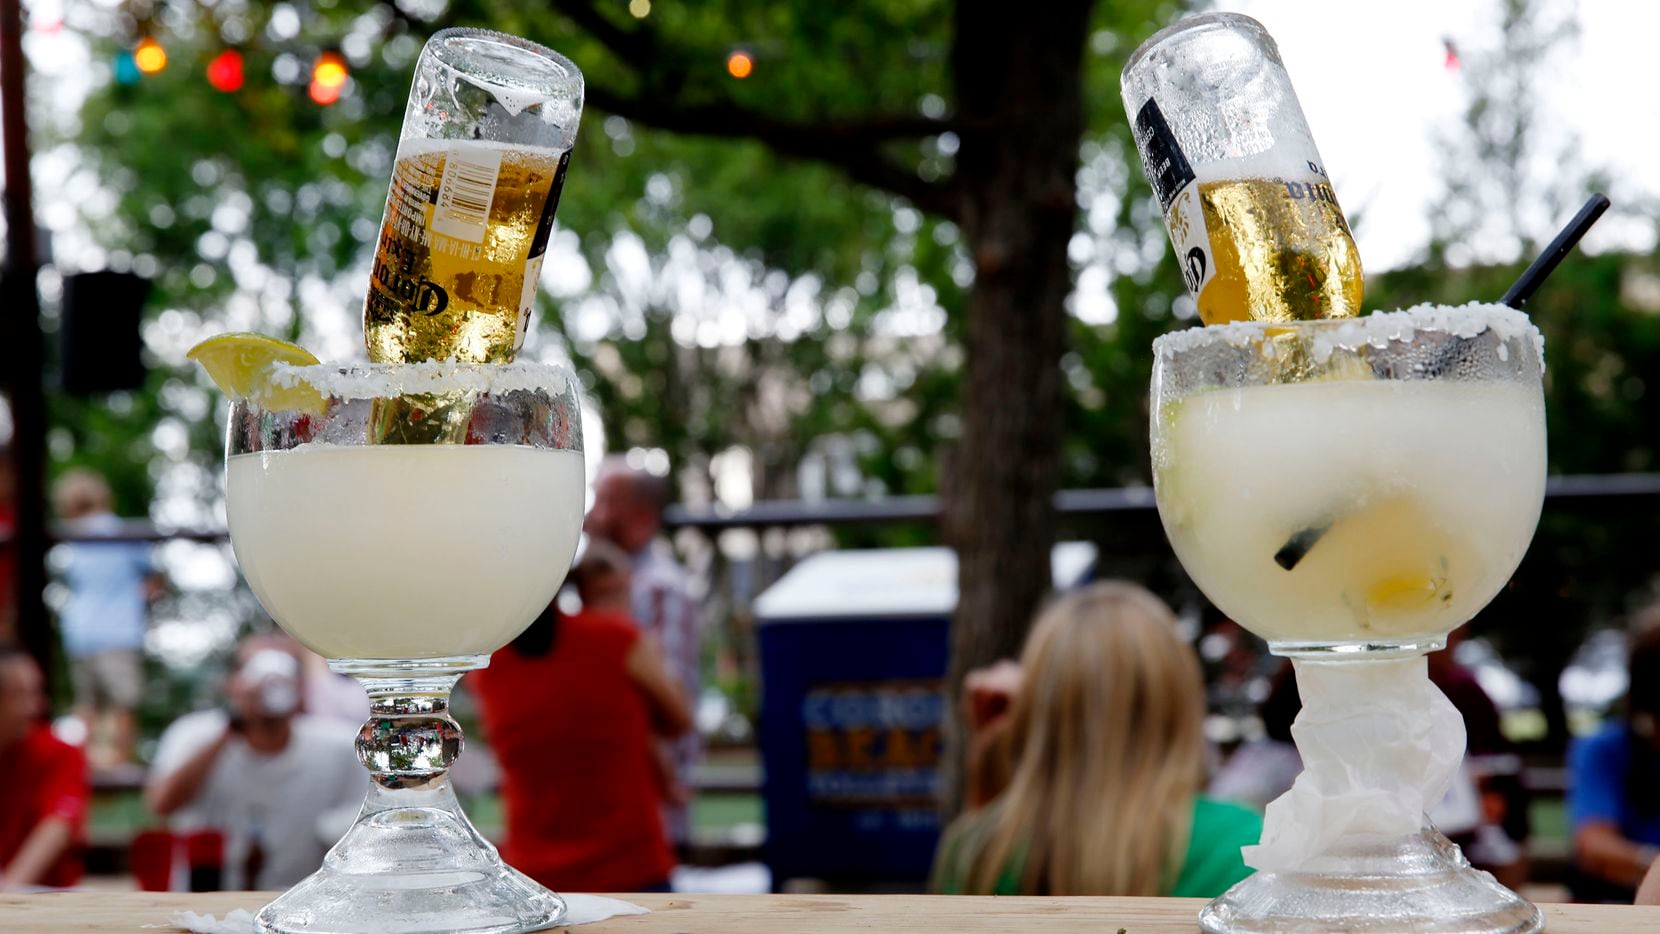 Katy Trail Ice House reopened Aug. 7, 2020 in Dallas after being shut down by the governor for more than a month.